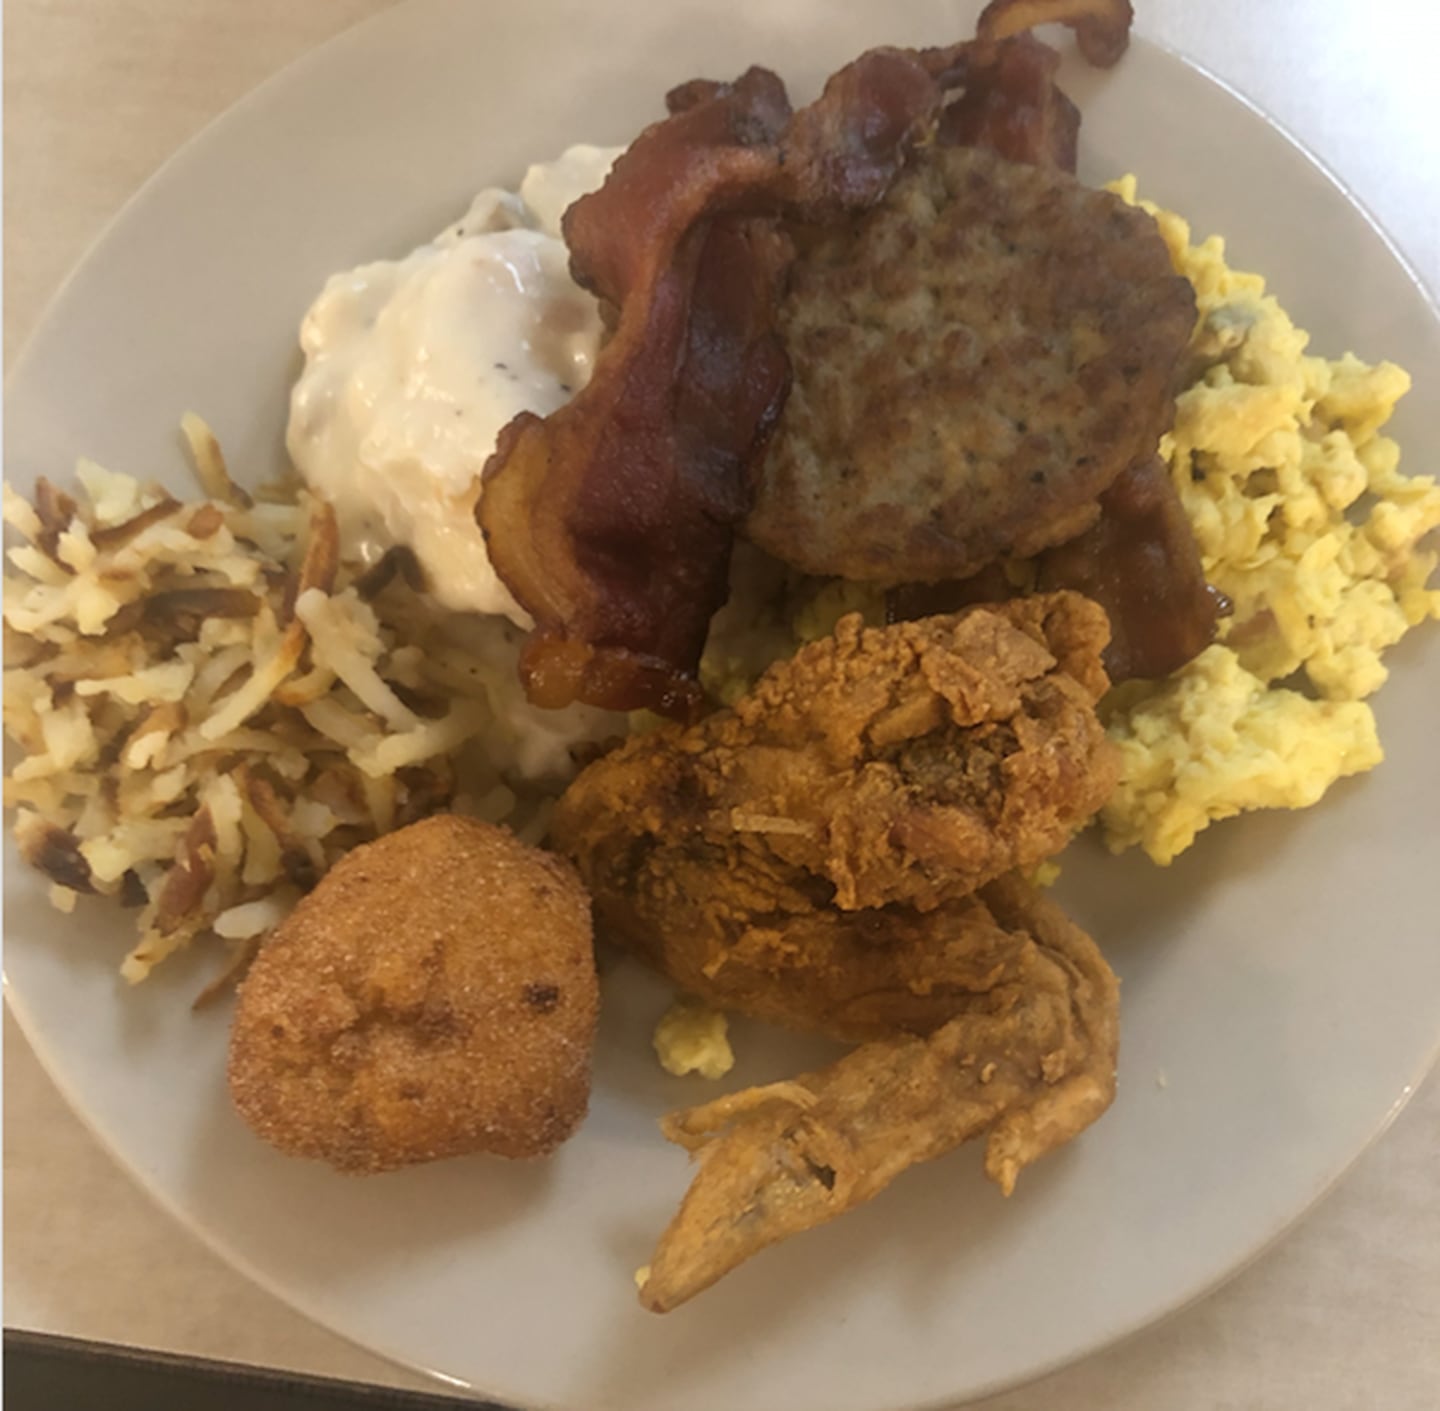 There are plenty of items to fill your plate from the Sunday Brunch at Cindy's on 34 in Mendota.